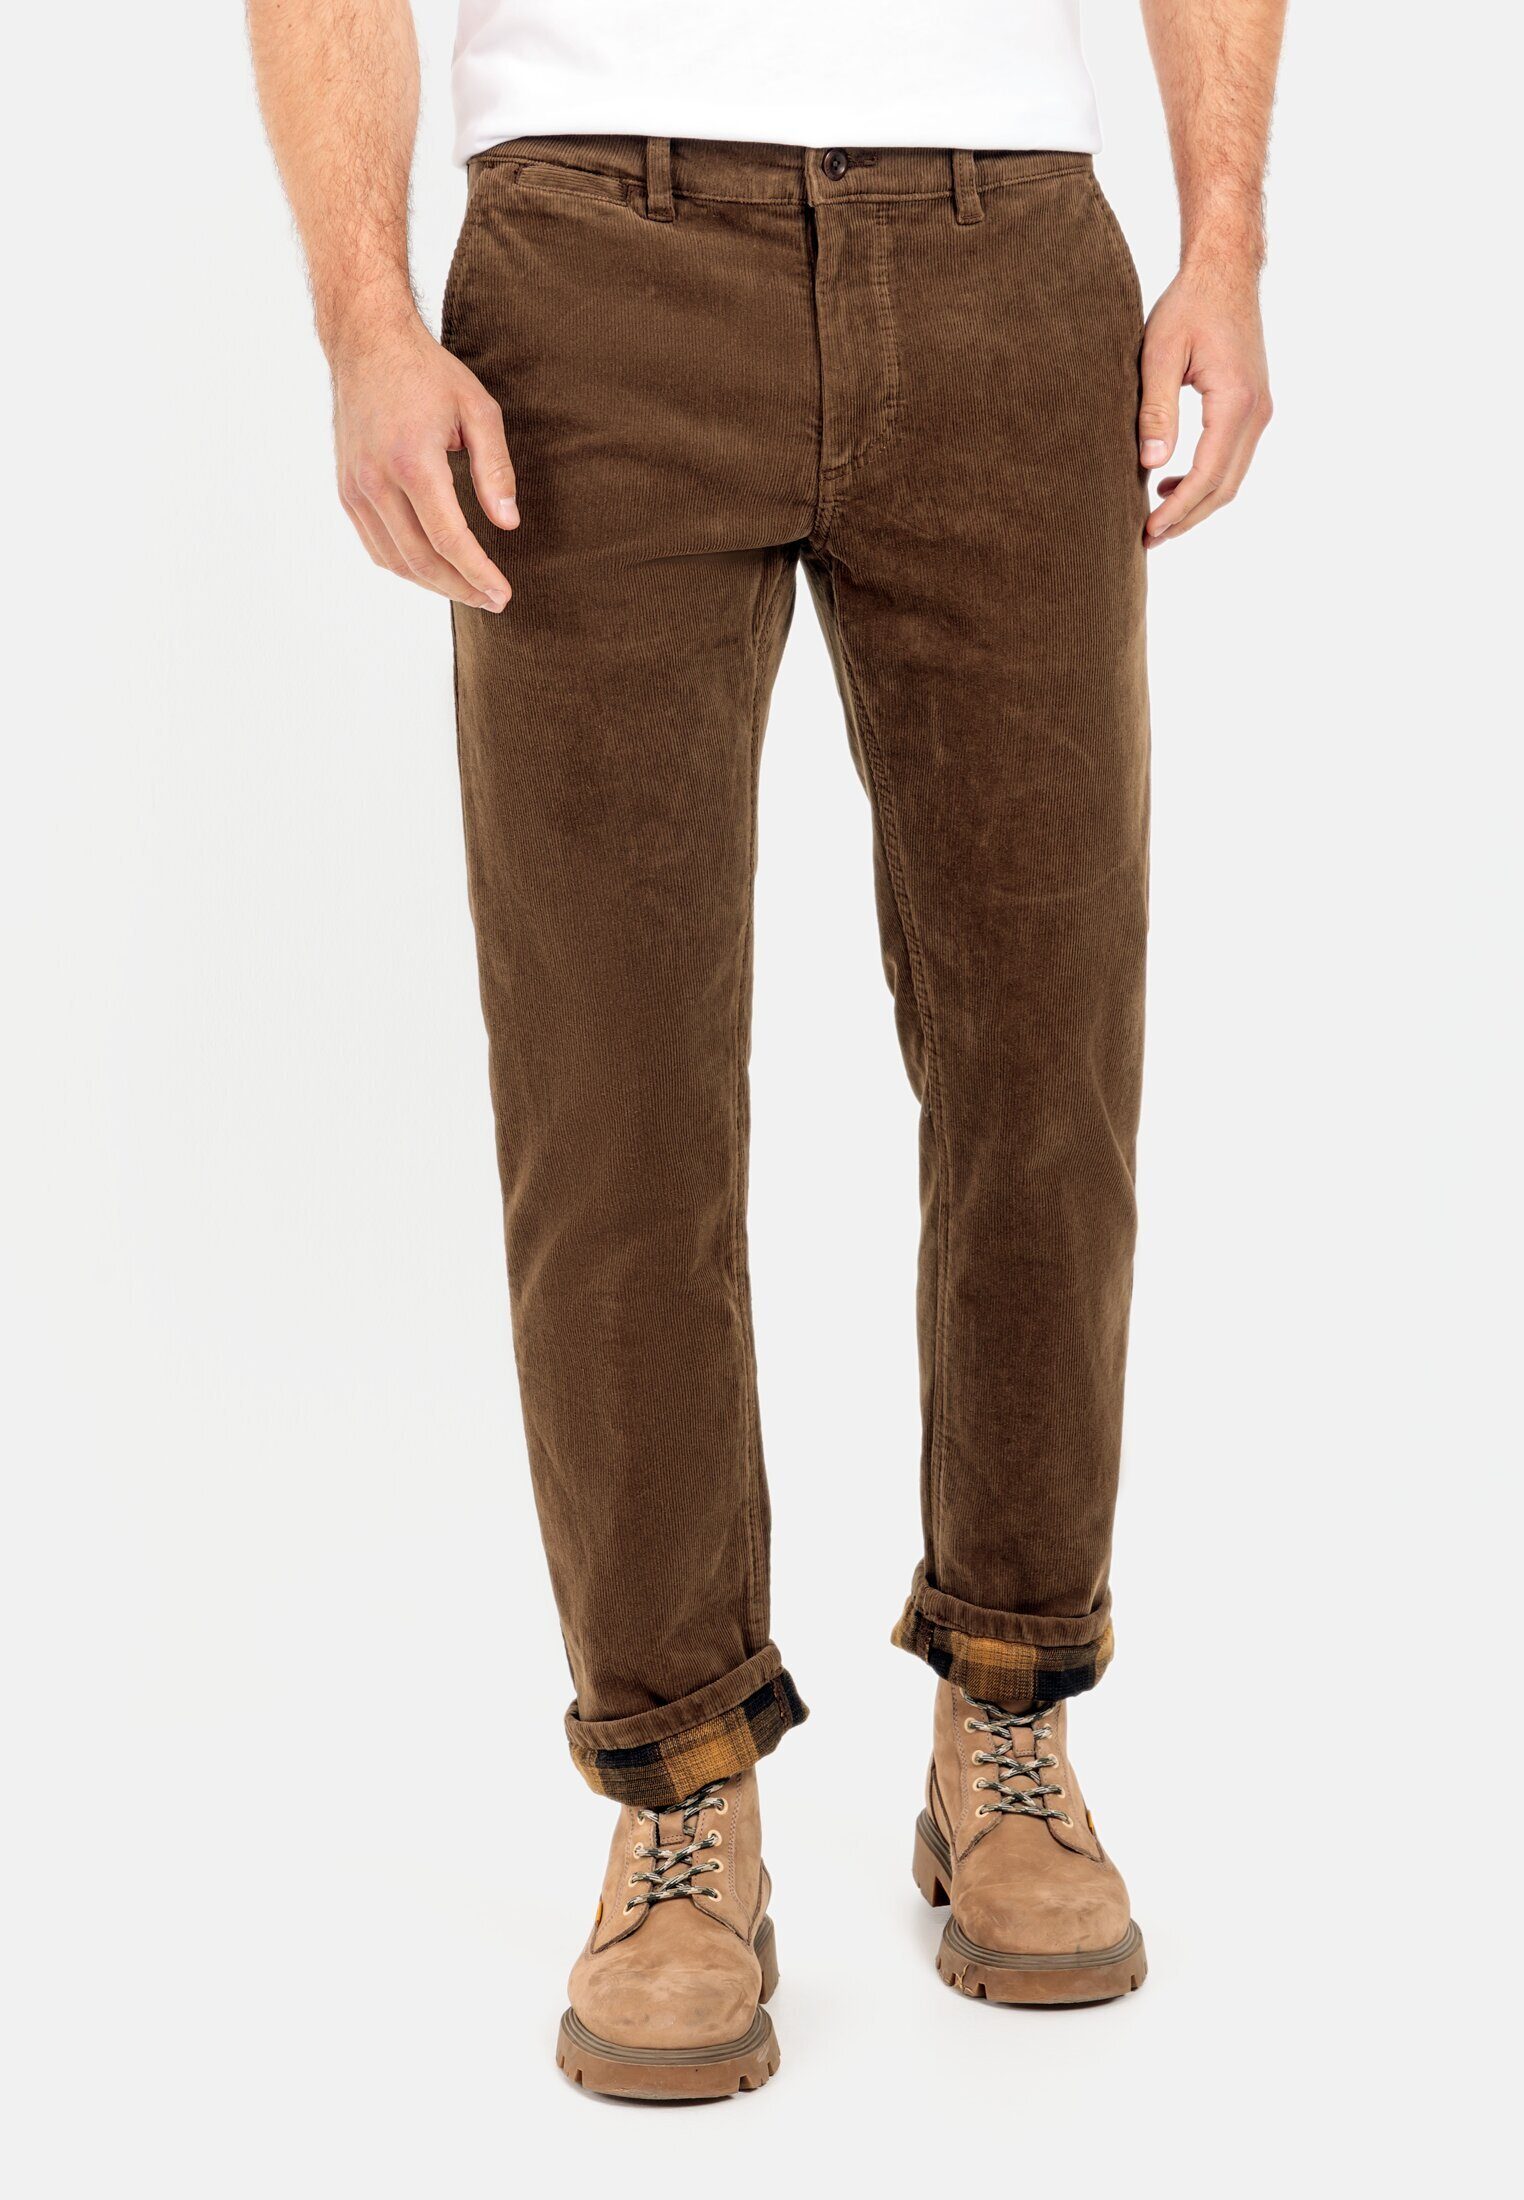 Thermofutter Braun camel Cord (1-tlg) Chino mit Chinos active